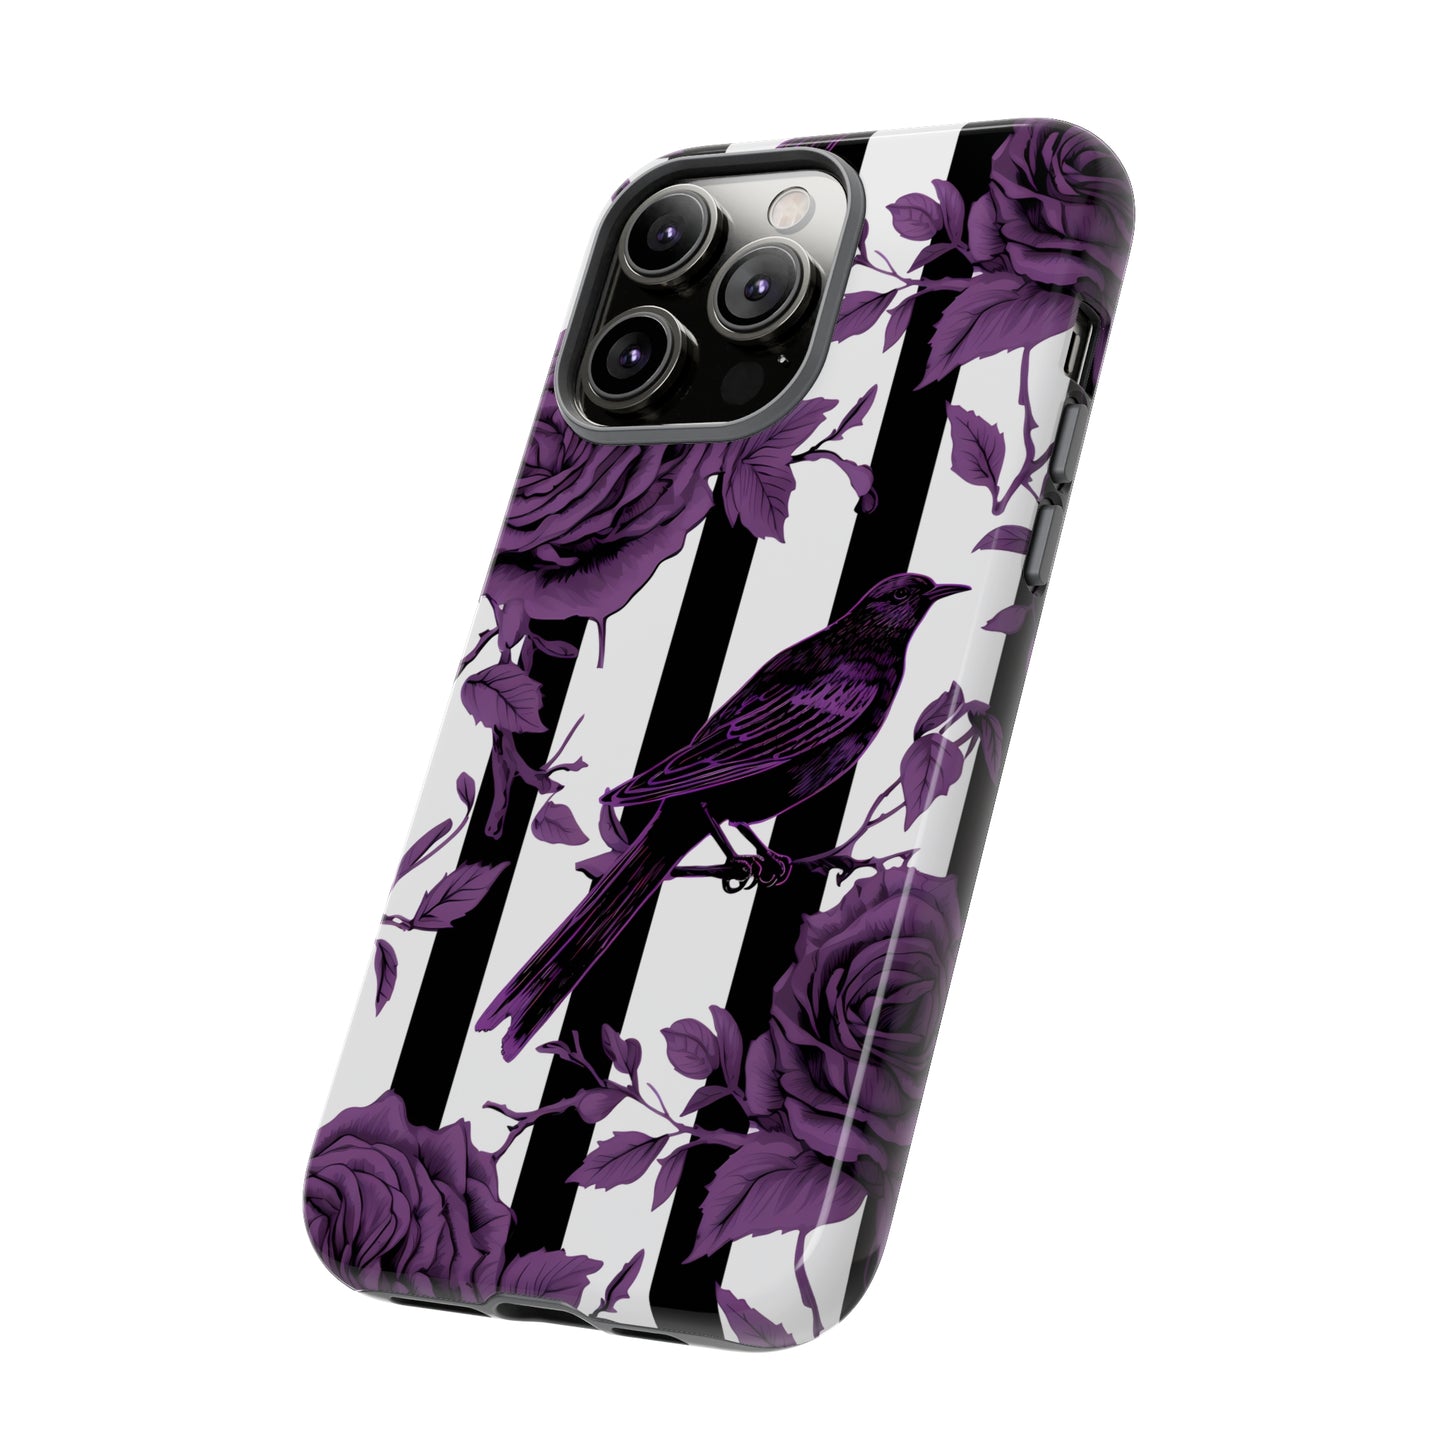 Striped Crows and Roses Tough Cases for iPhone Samsung Google PhonesPhone CaseVTZdesignsGoogle Pixel 6GlossyAccessoriescrowsGlossy